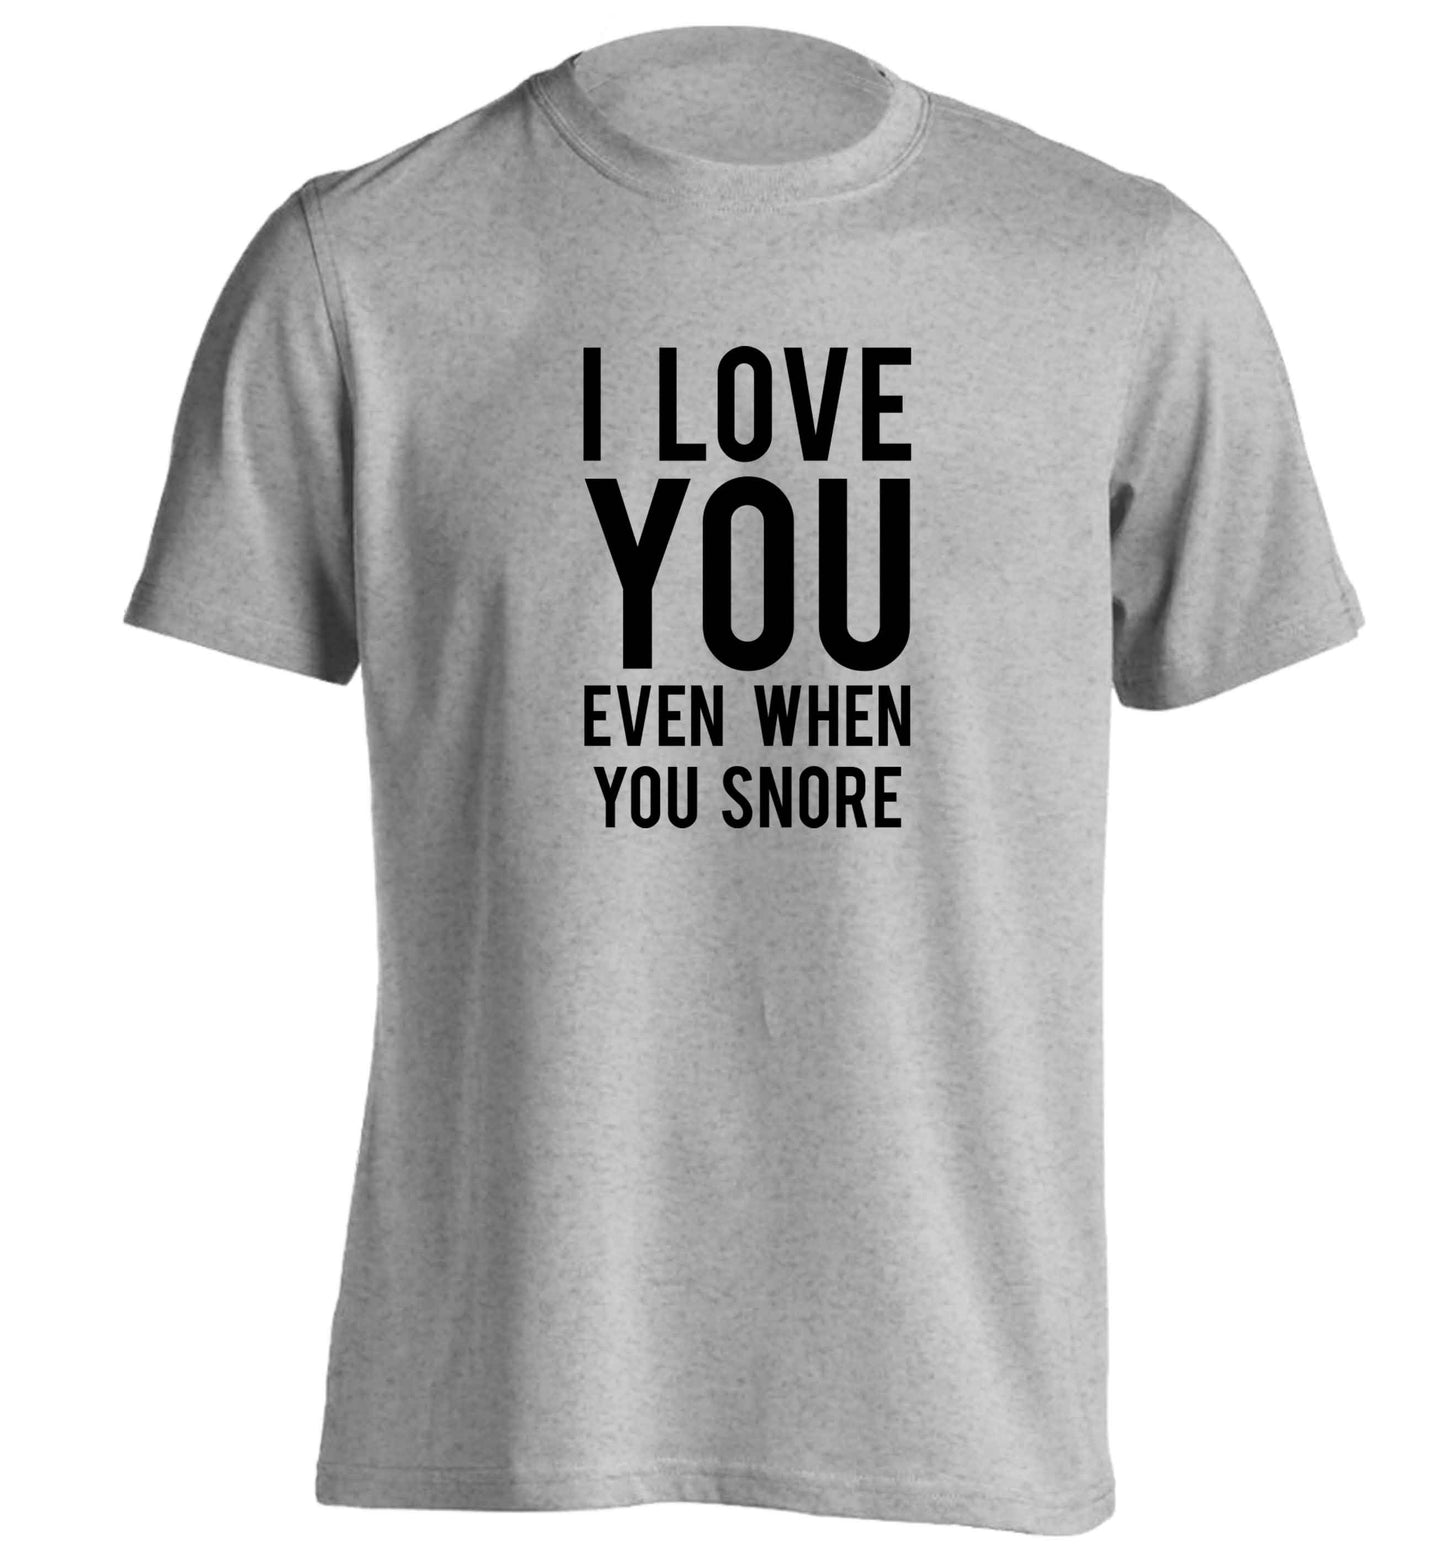 I love you even when you snore adults unisex grey Tshirt 2XL